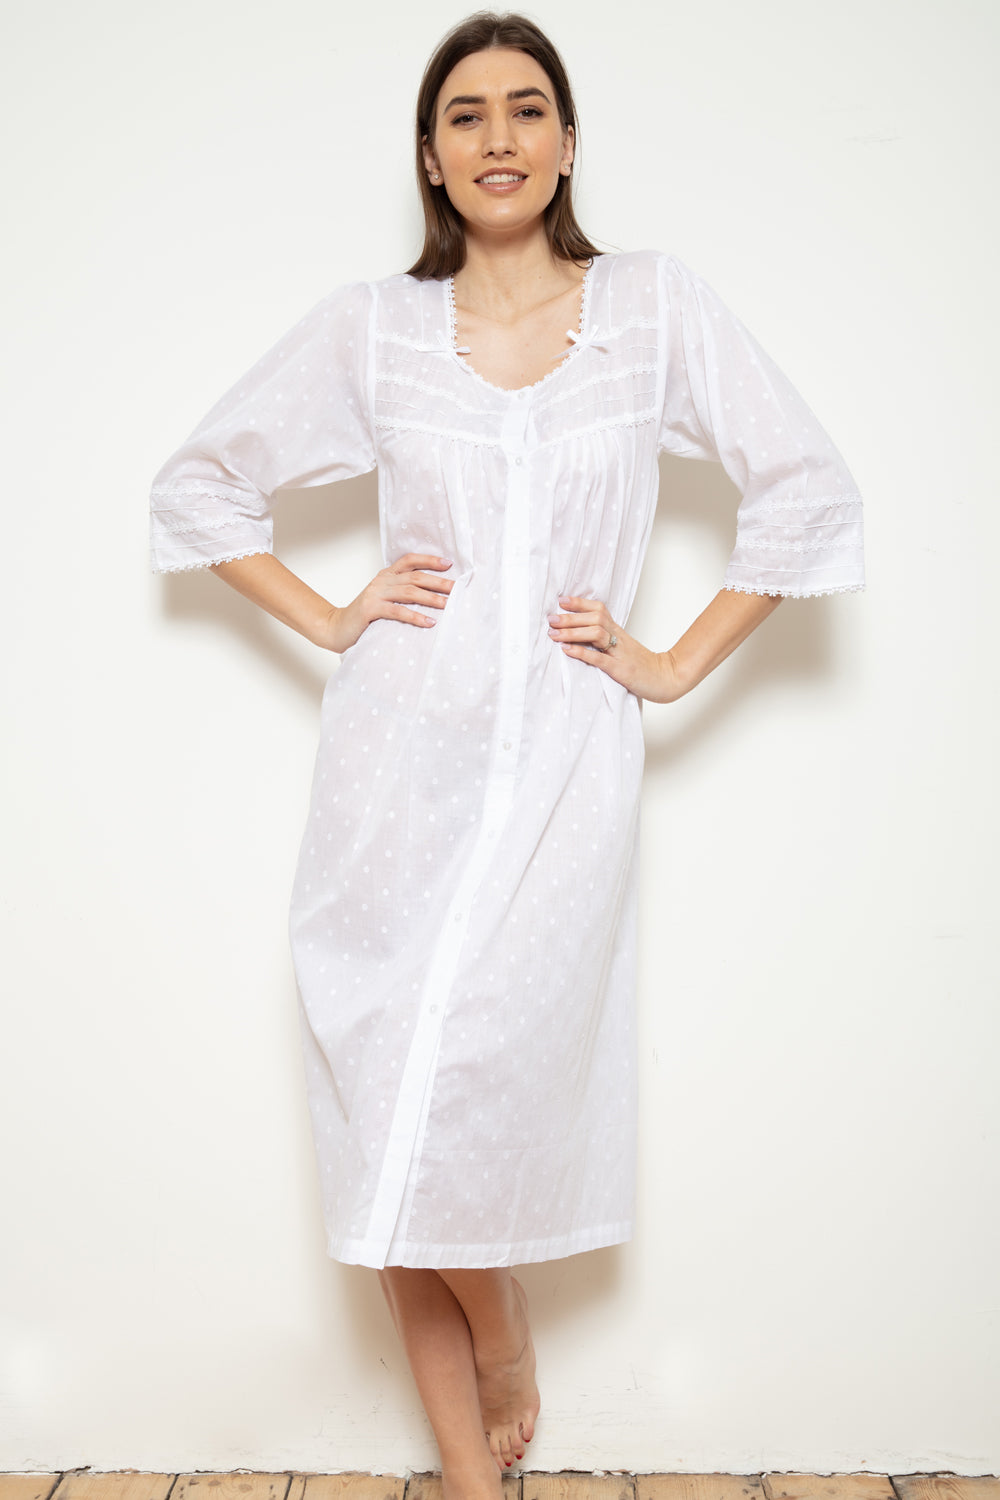 Cottonreal 'Jay' Cotton Voile Jacquard Polka Dot Button Front Nightdress